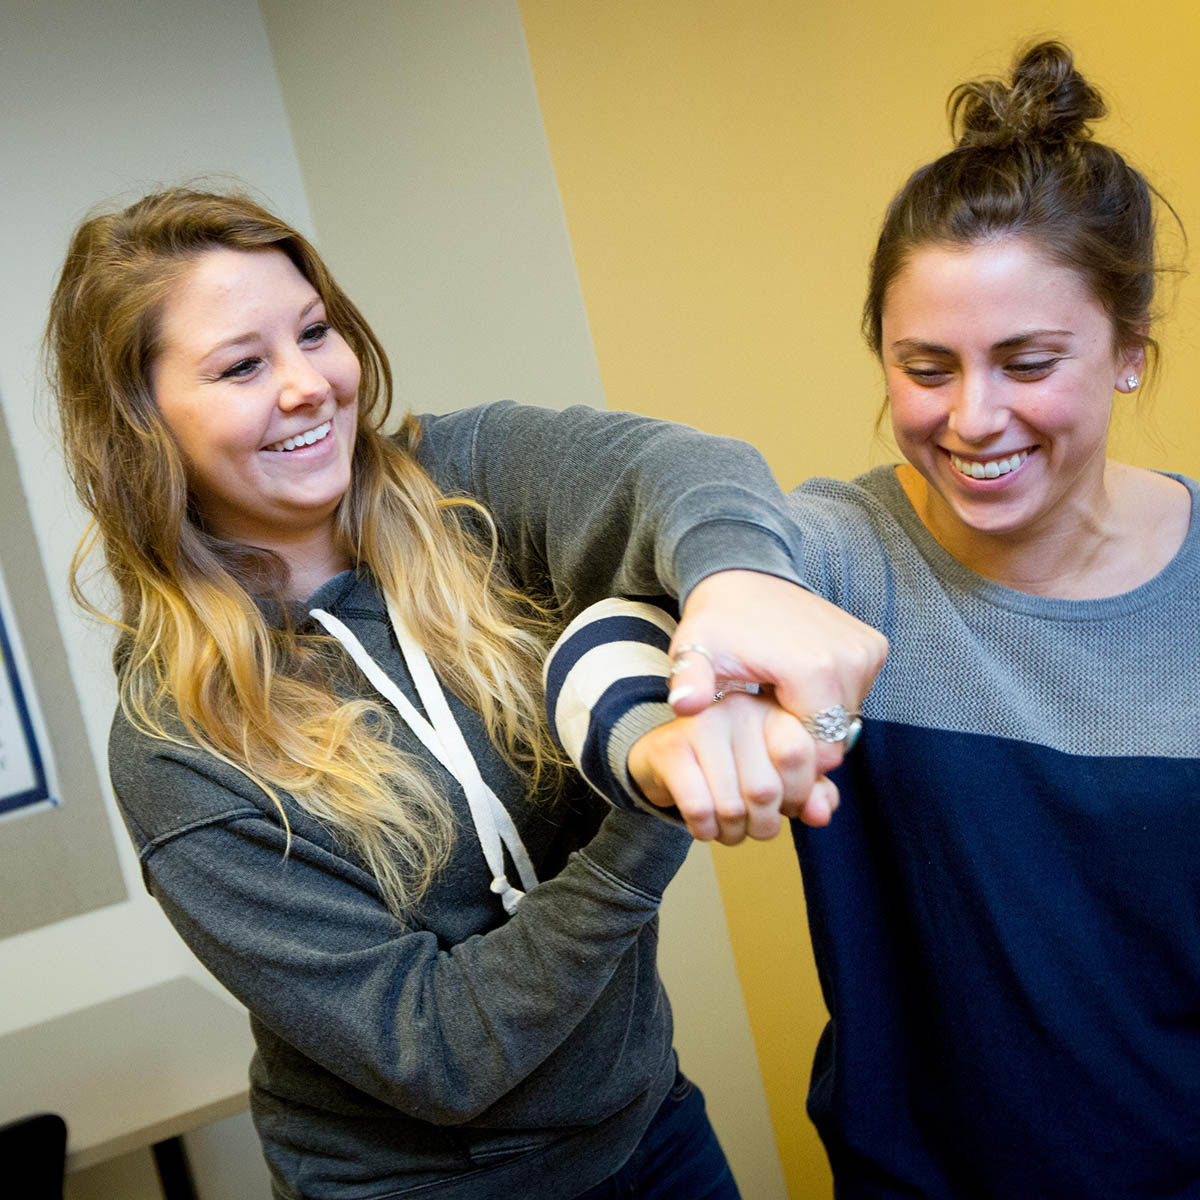 Photo of two occupational therapy students smiling and working together